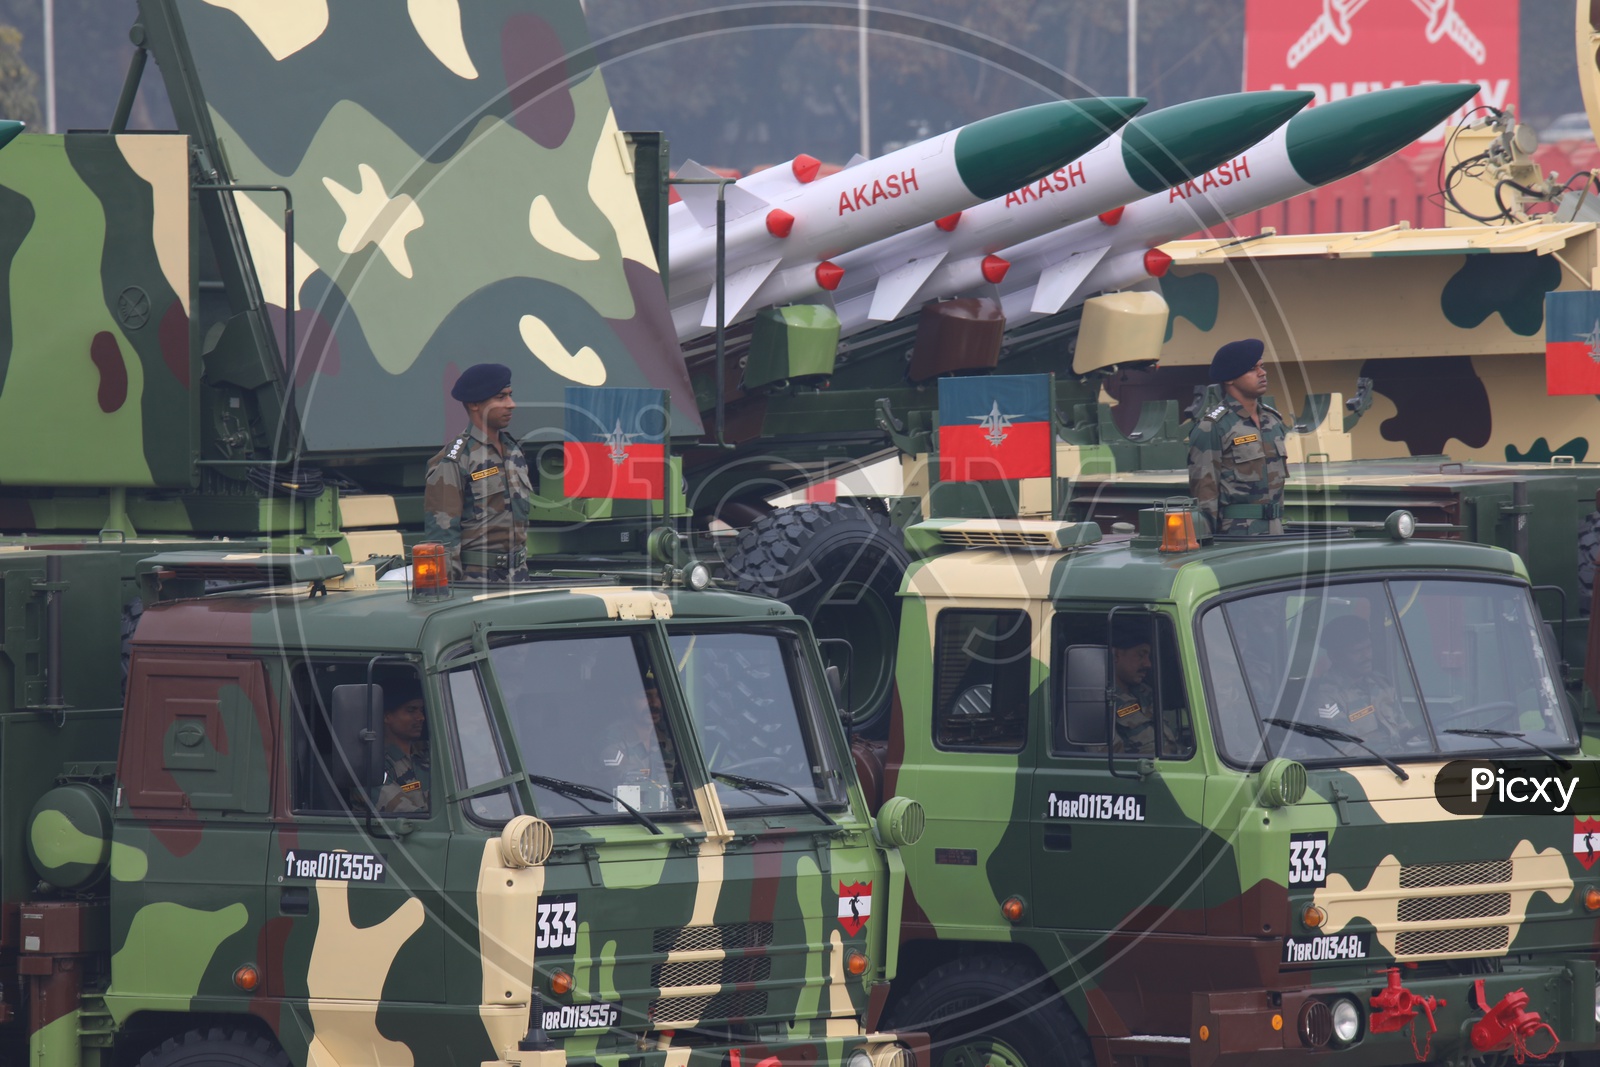 Indian Army Akash Missile Launcher Vehicles